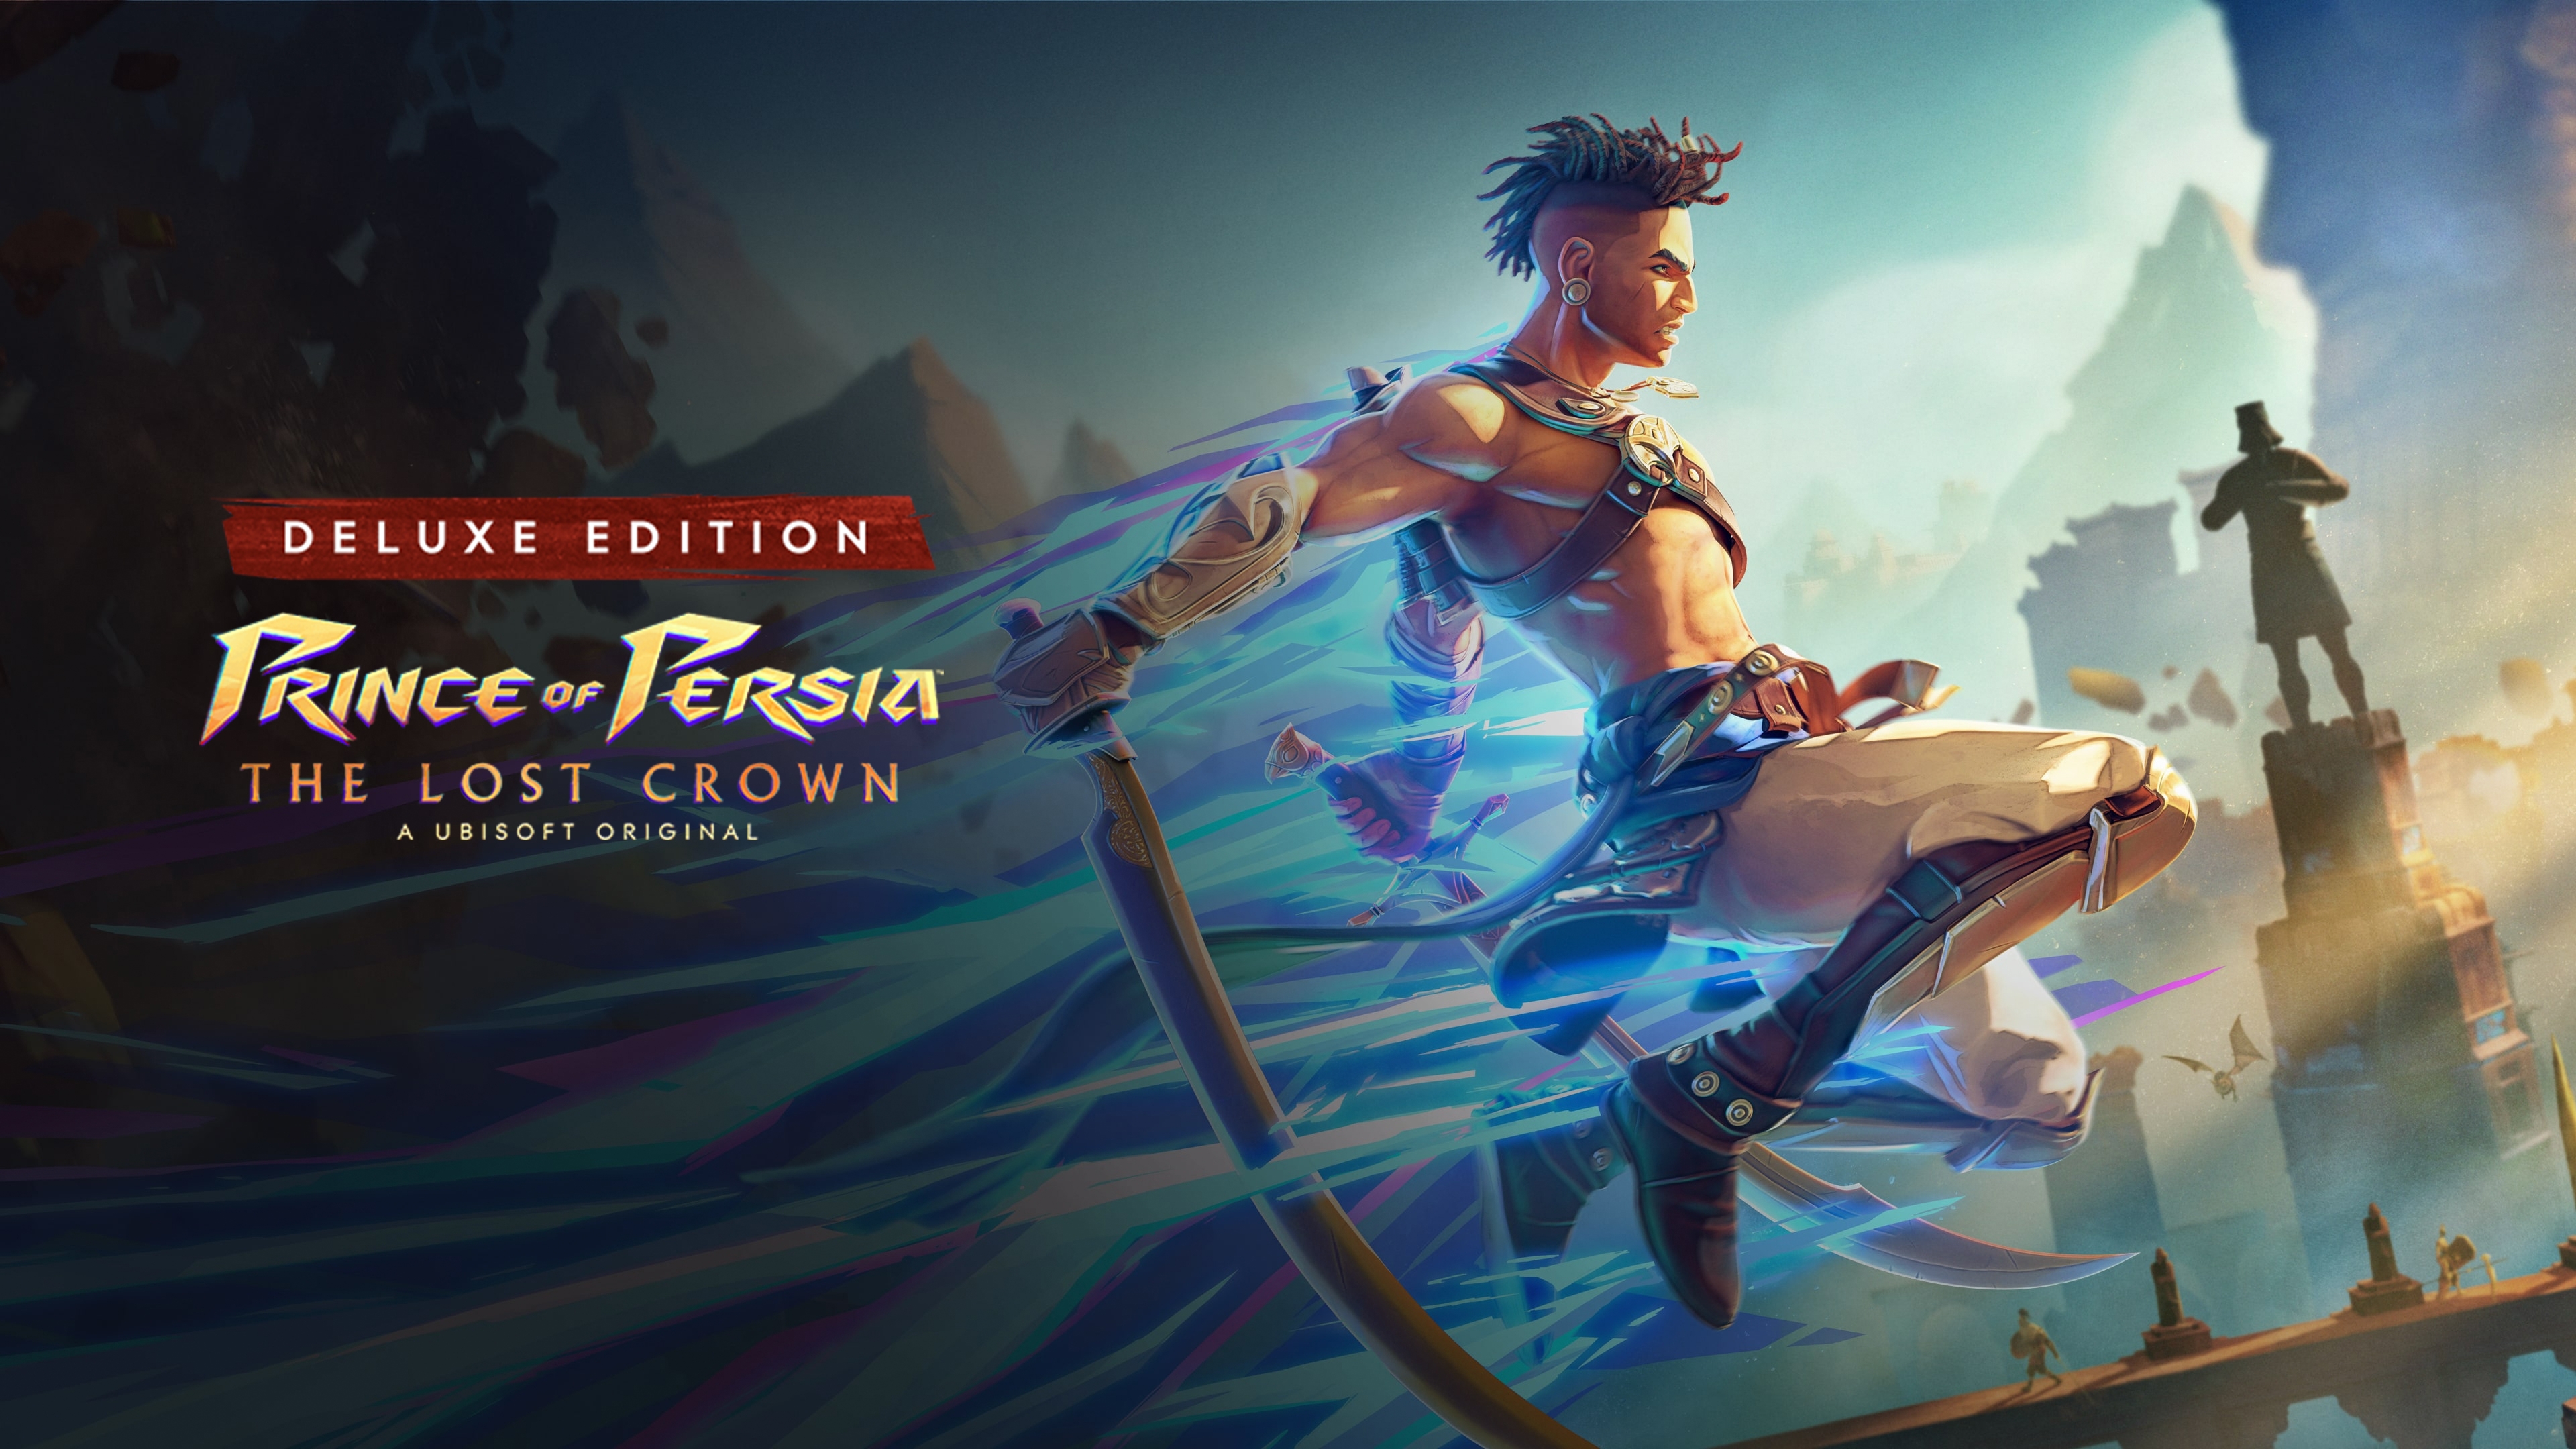 Prince of Persia: The Lost Crown announced, a new 2.5D side